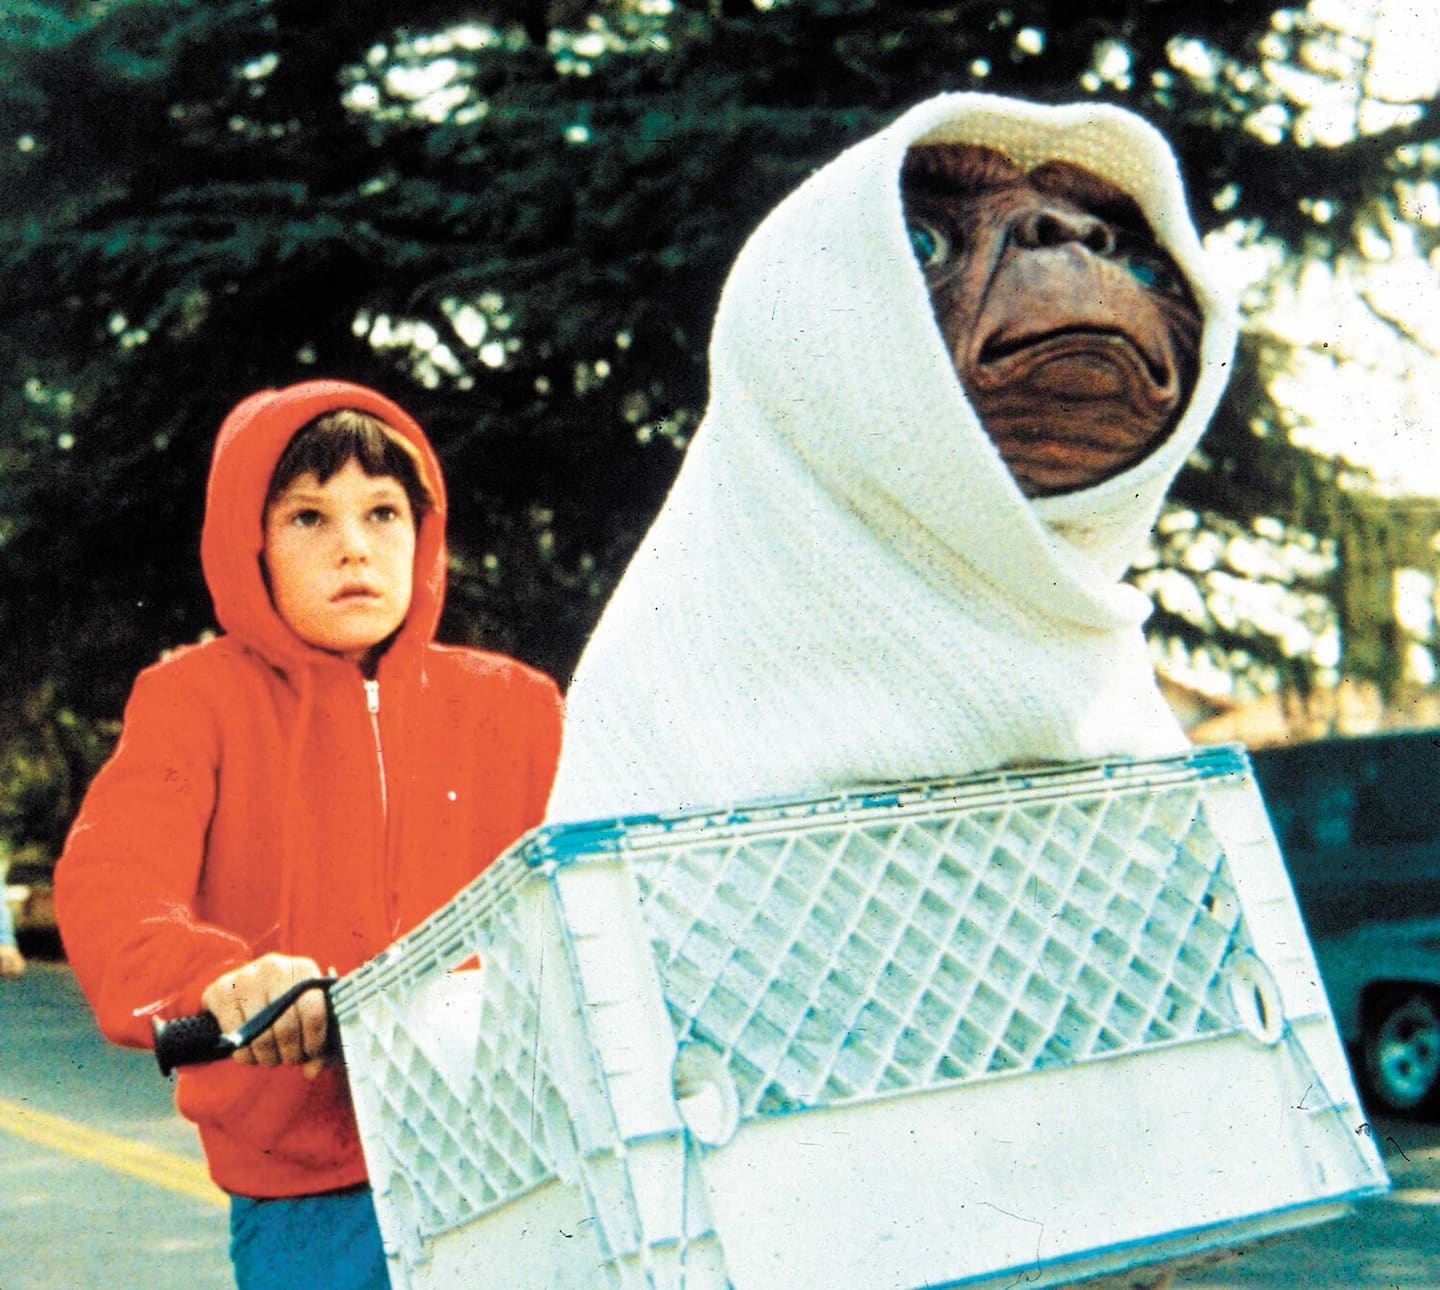 Cine nostalgia: the 40 years of “E.T.”, “The thing” and “Blade Runner”